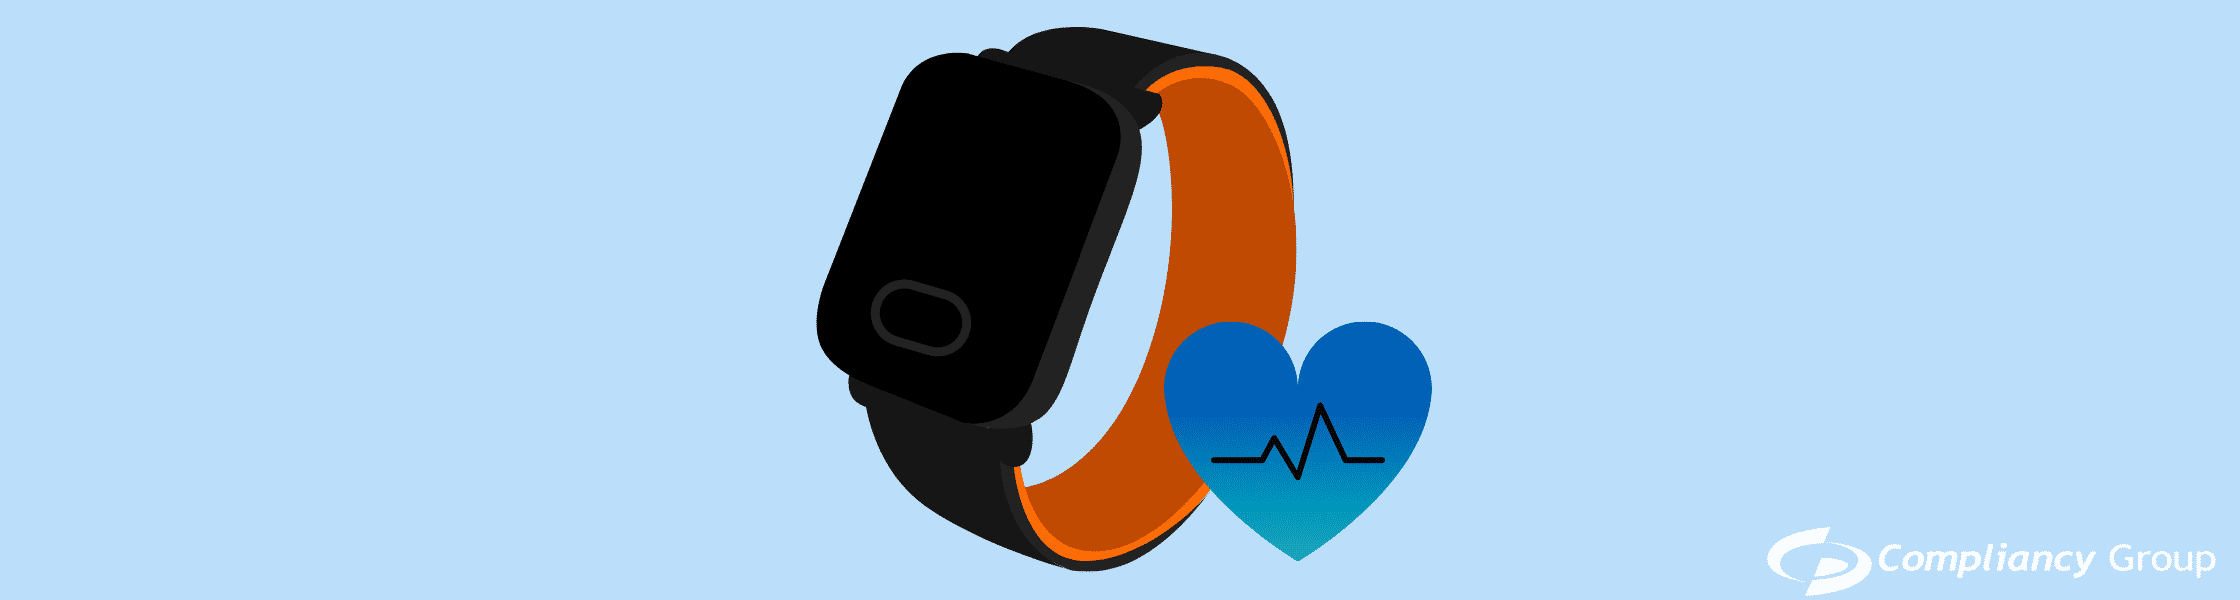 Wearable HIPAA Security Concerns Grow for mHealth Apps & Devices